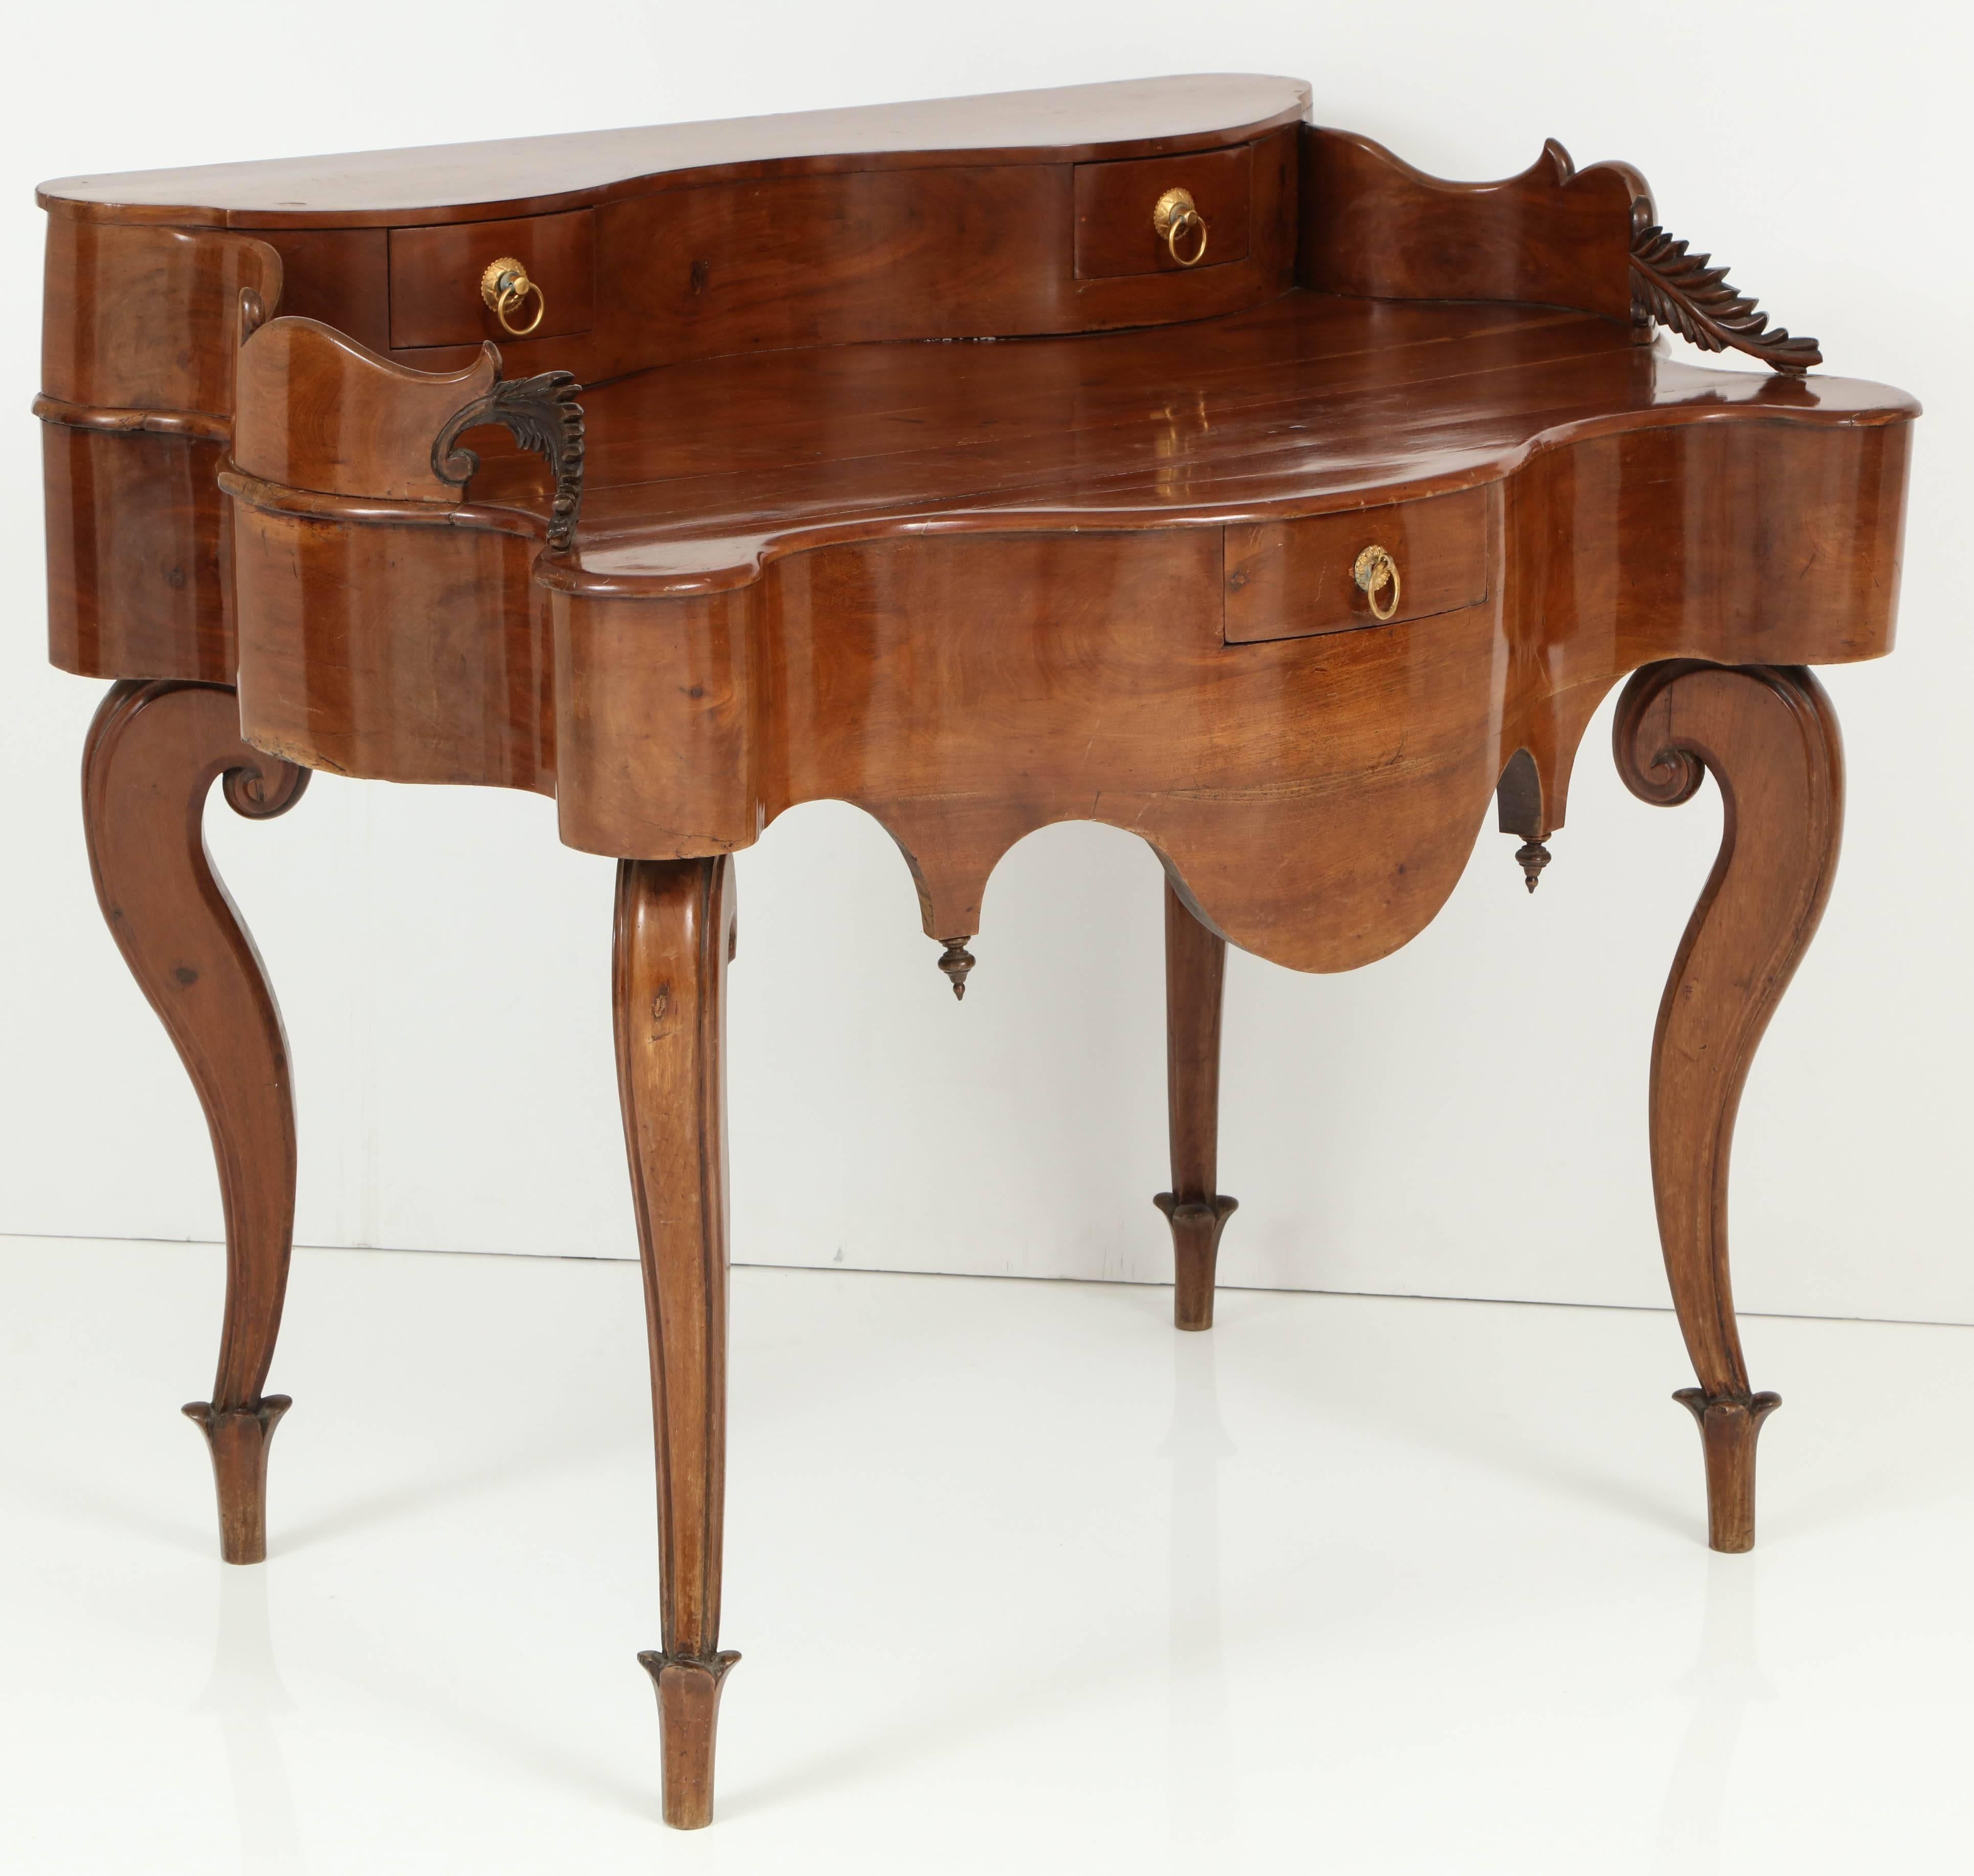 Exquisite late 19th century Spanish desk executed in walnut, wood displays wonderful movement on all sides.